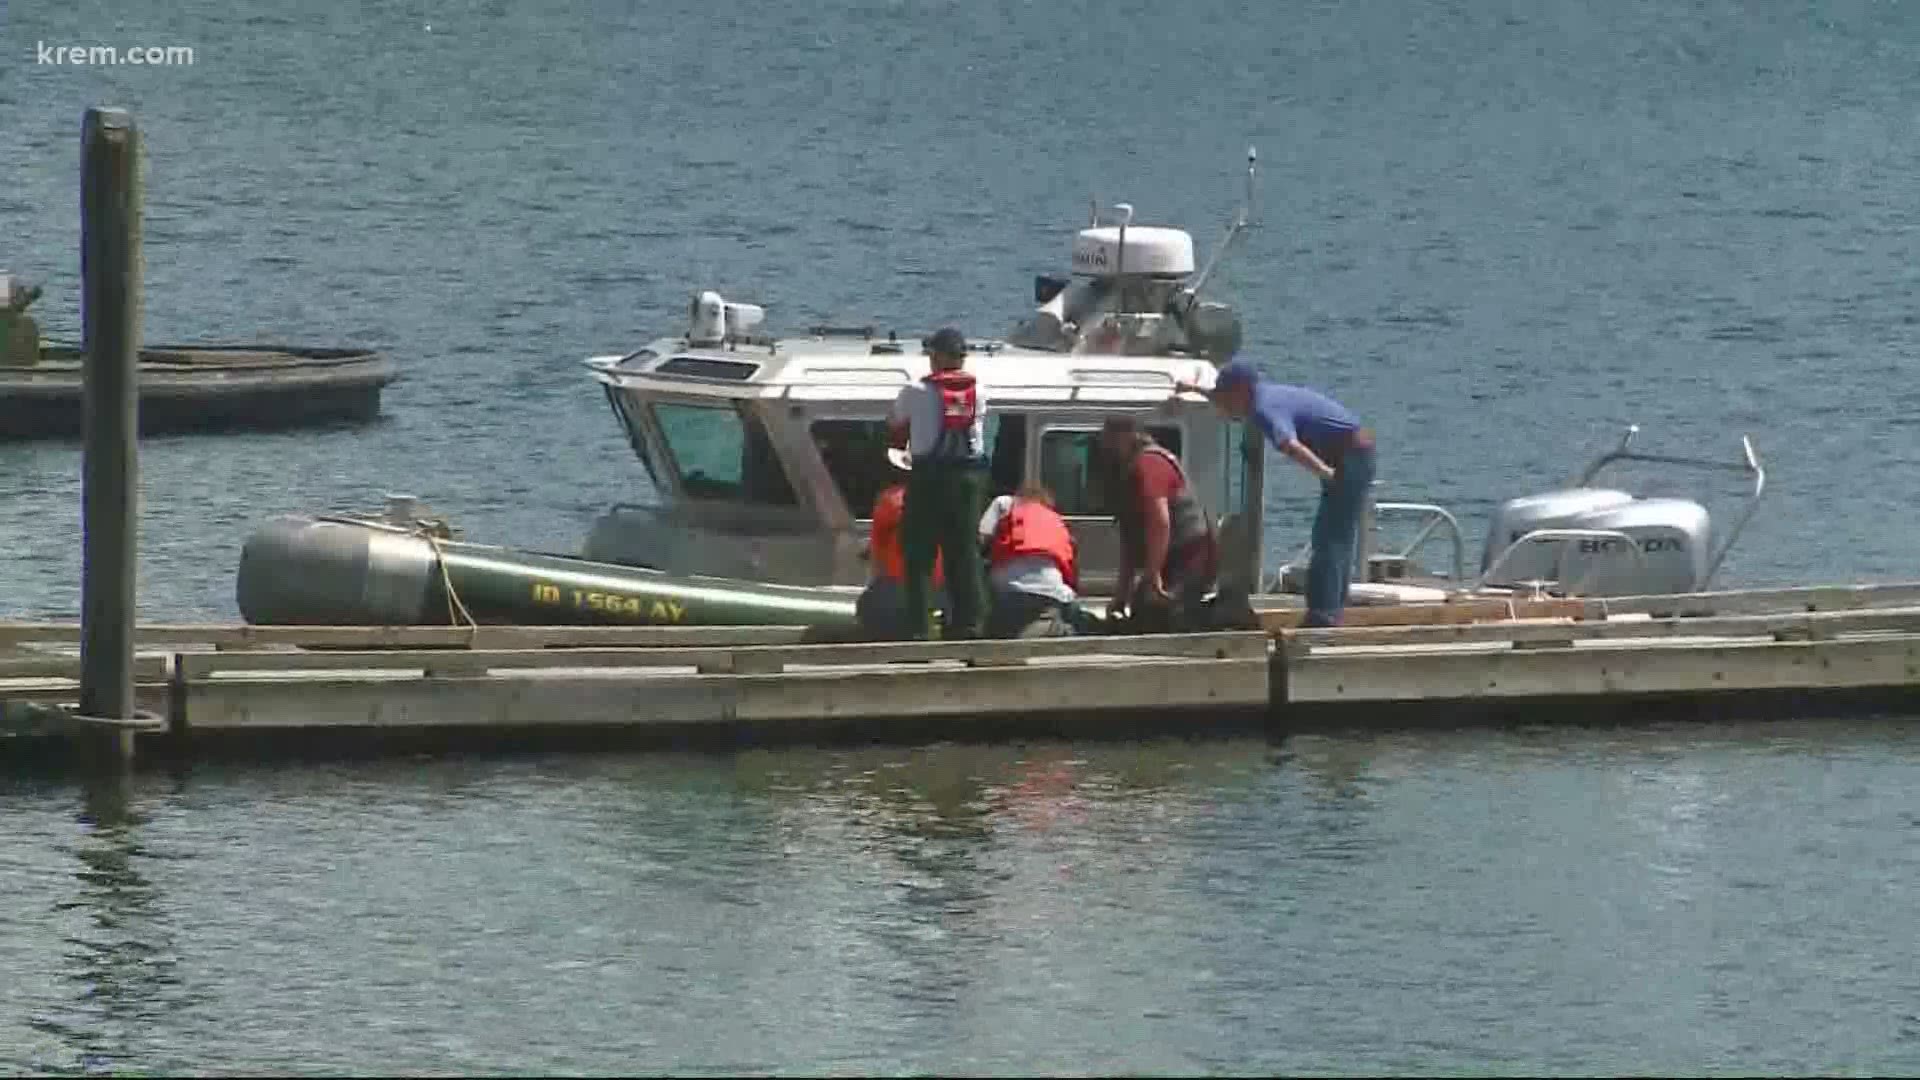 Authorities closed off the Loffs Bay boat launch on the Western edge of Lake Coeur d'Alene so that crews could launch a large crane on a barge to the crash site.